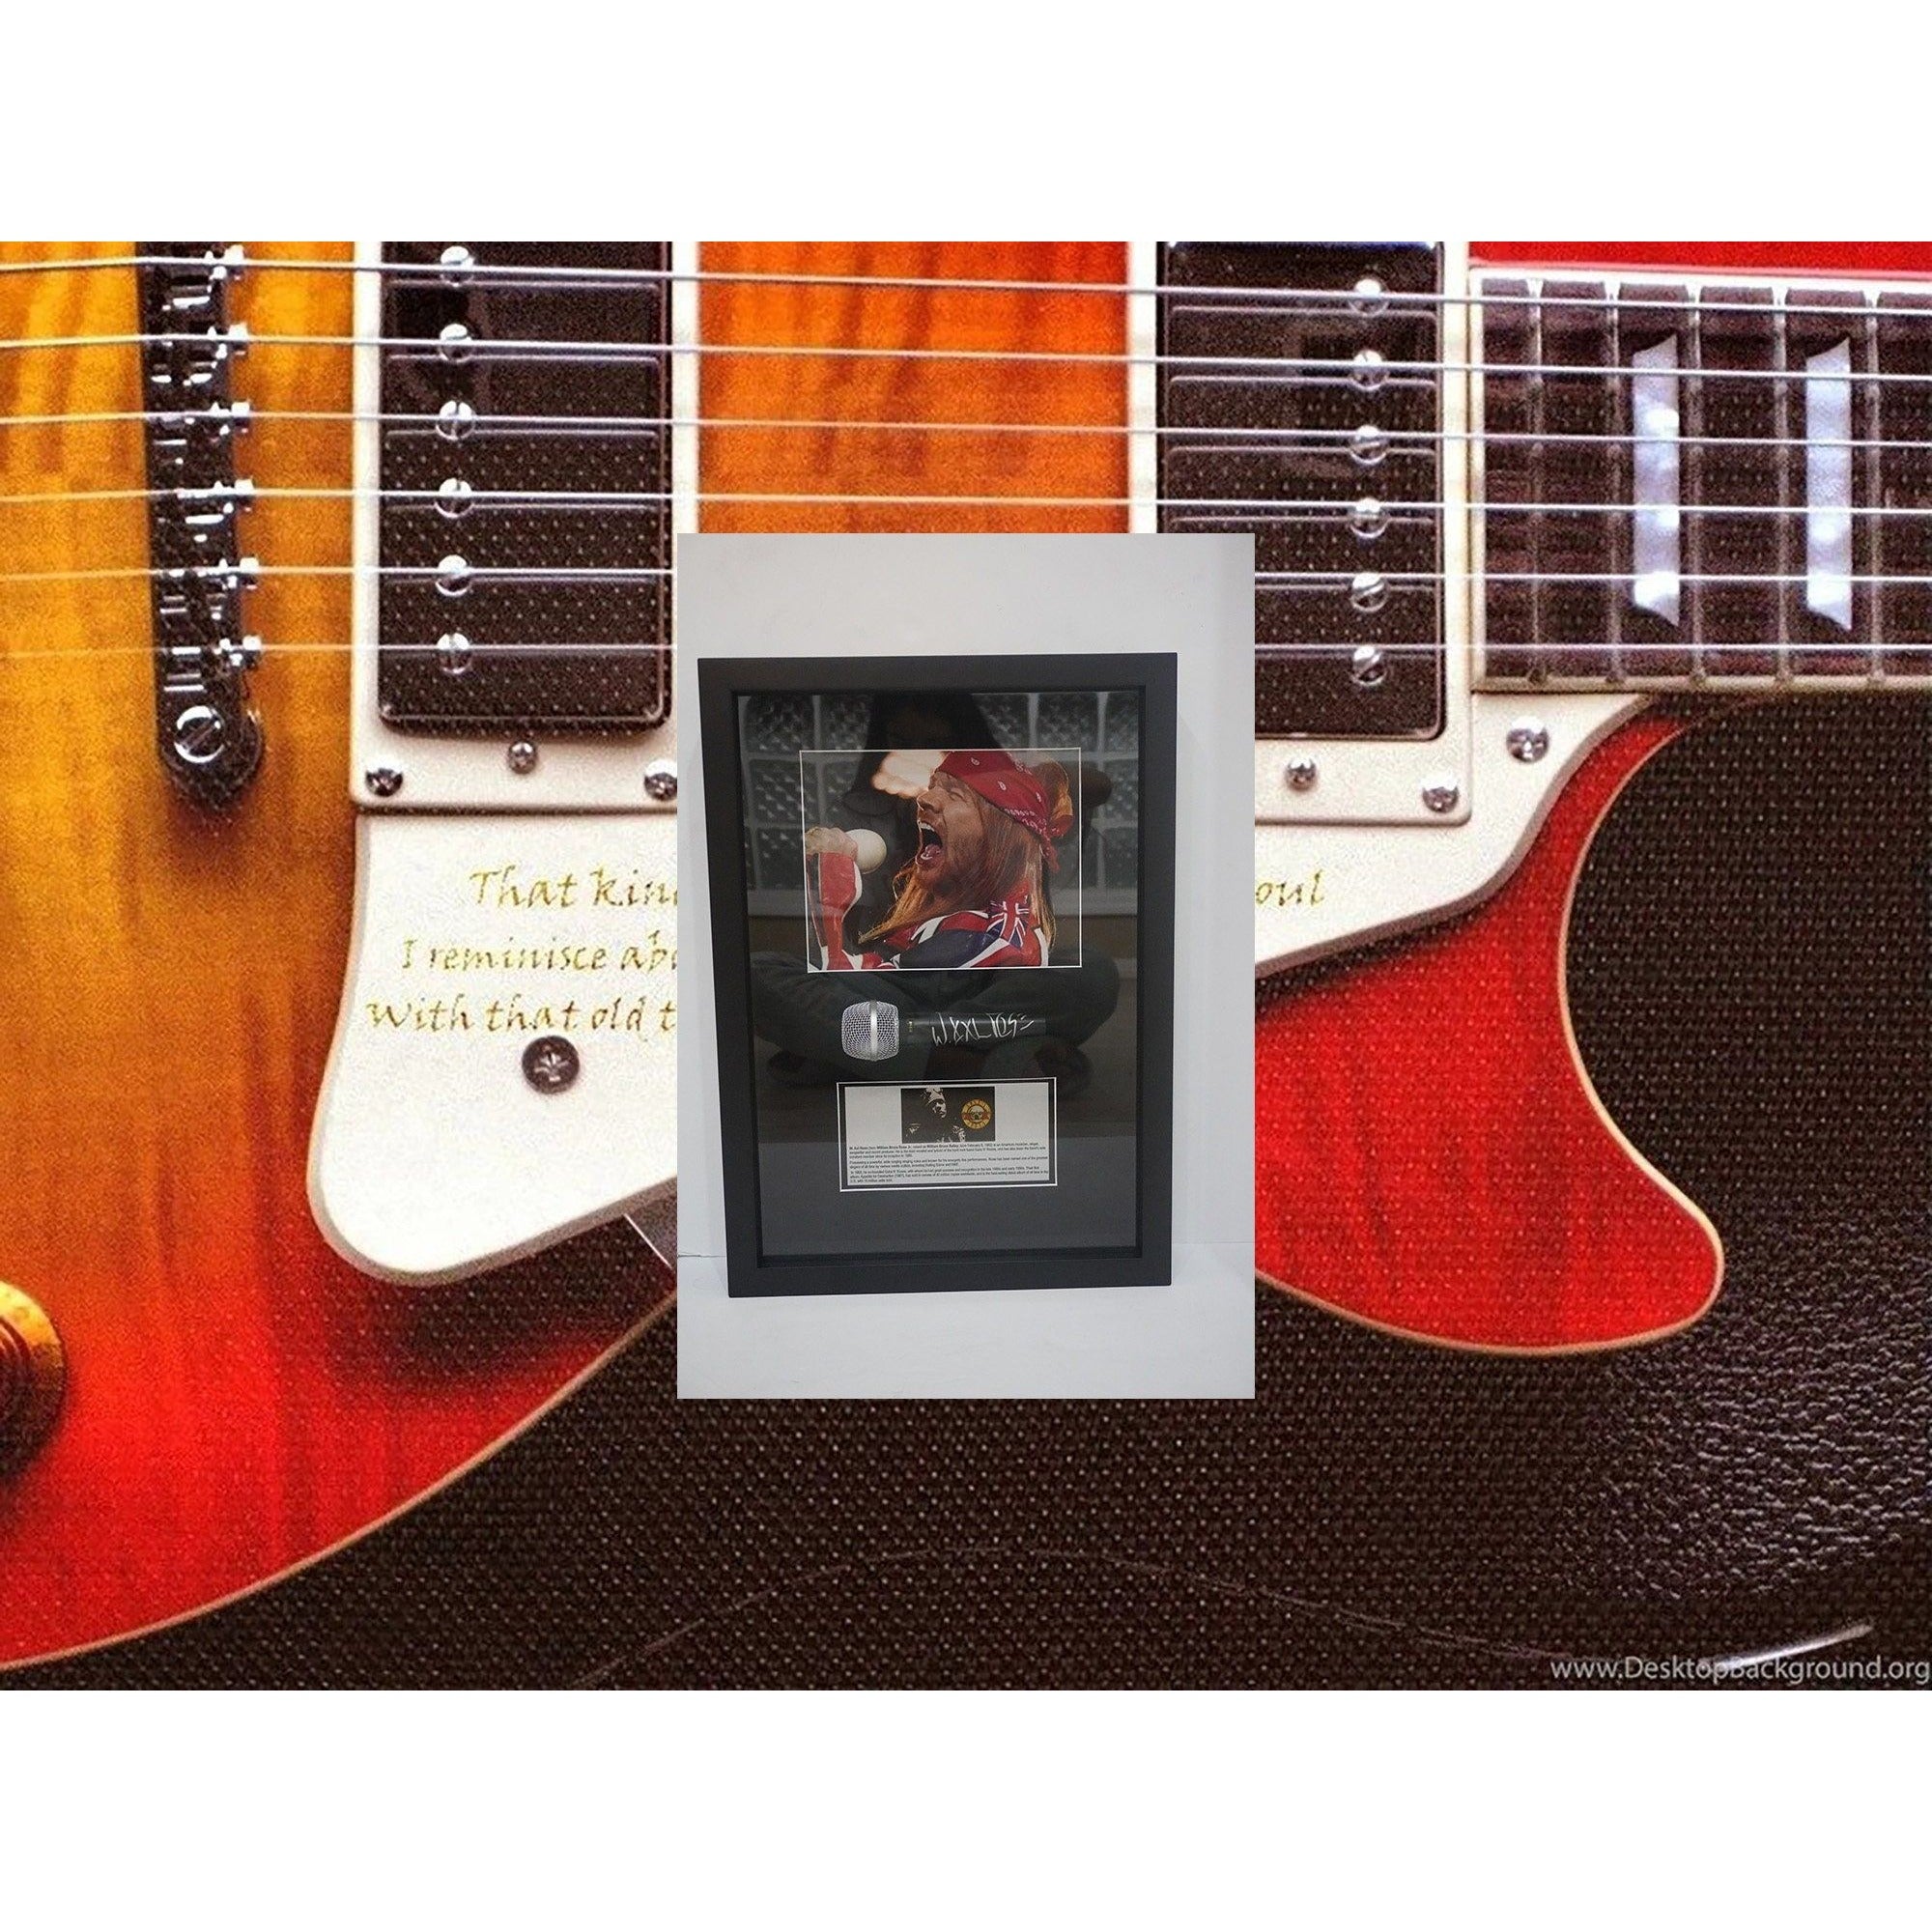 W. Axel Rose signed and framed microphone with proof